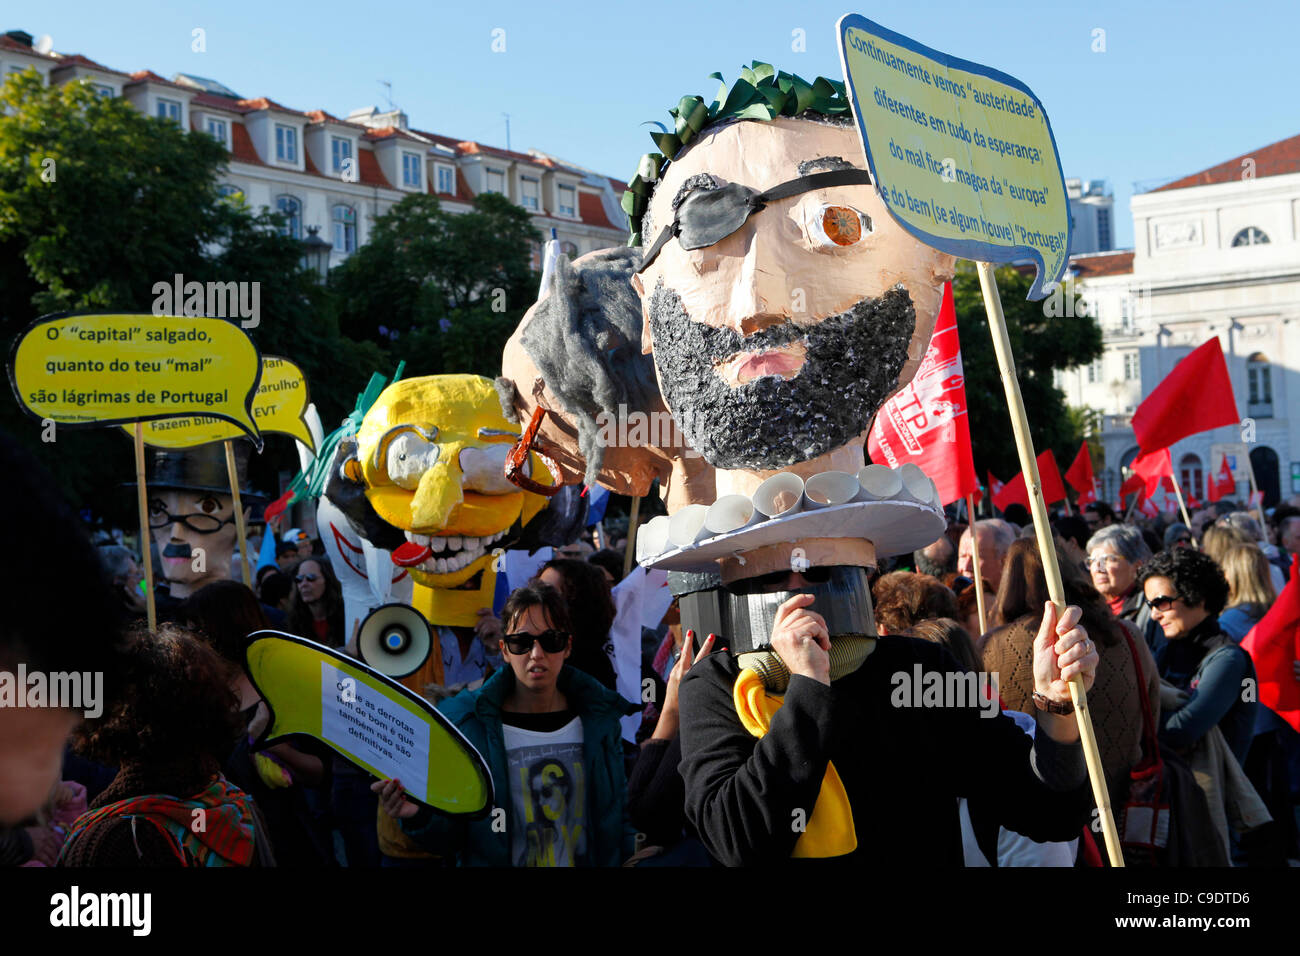 Workers and union members take part in the 24-hour Portuguese General Strike and demonstrate against the government's austerity programme in Lisbon, Portugal. The general strike (Greve Geral) and demonstration was one of the largest seen in recent times in Portugal. Photo by Stuart Forster. Stock Photo